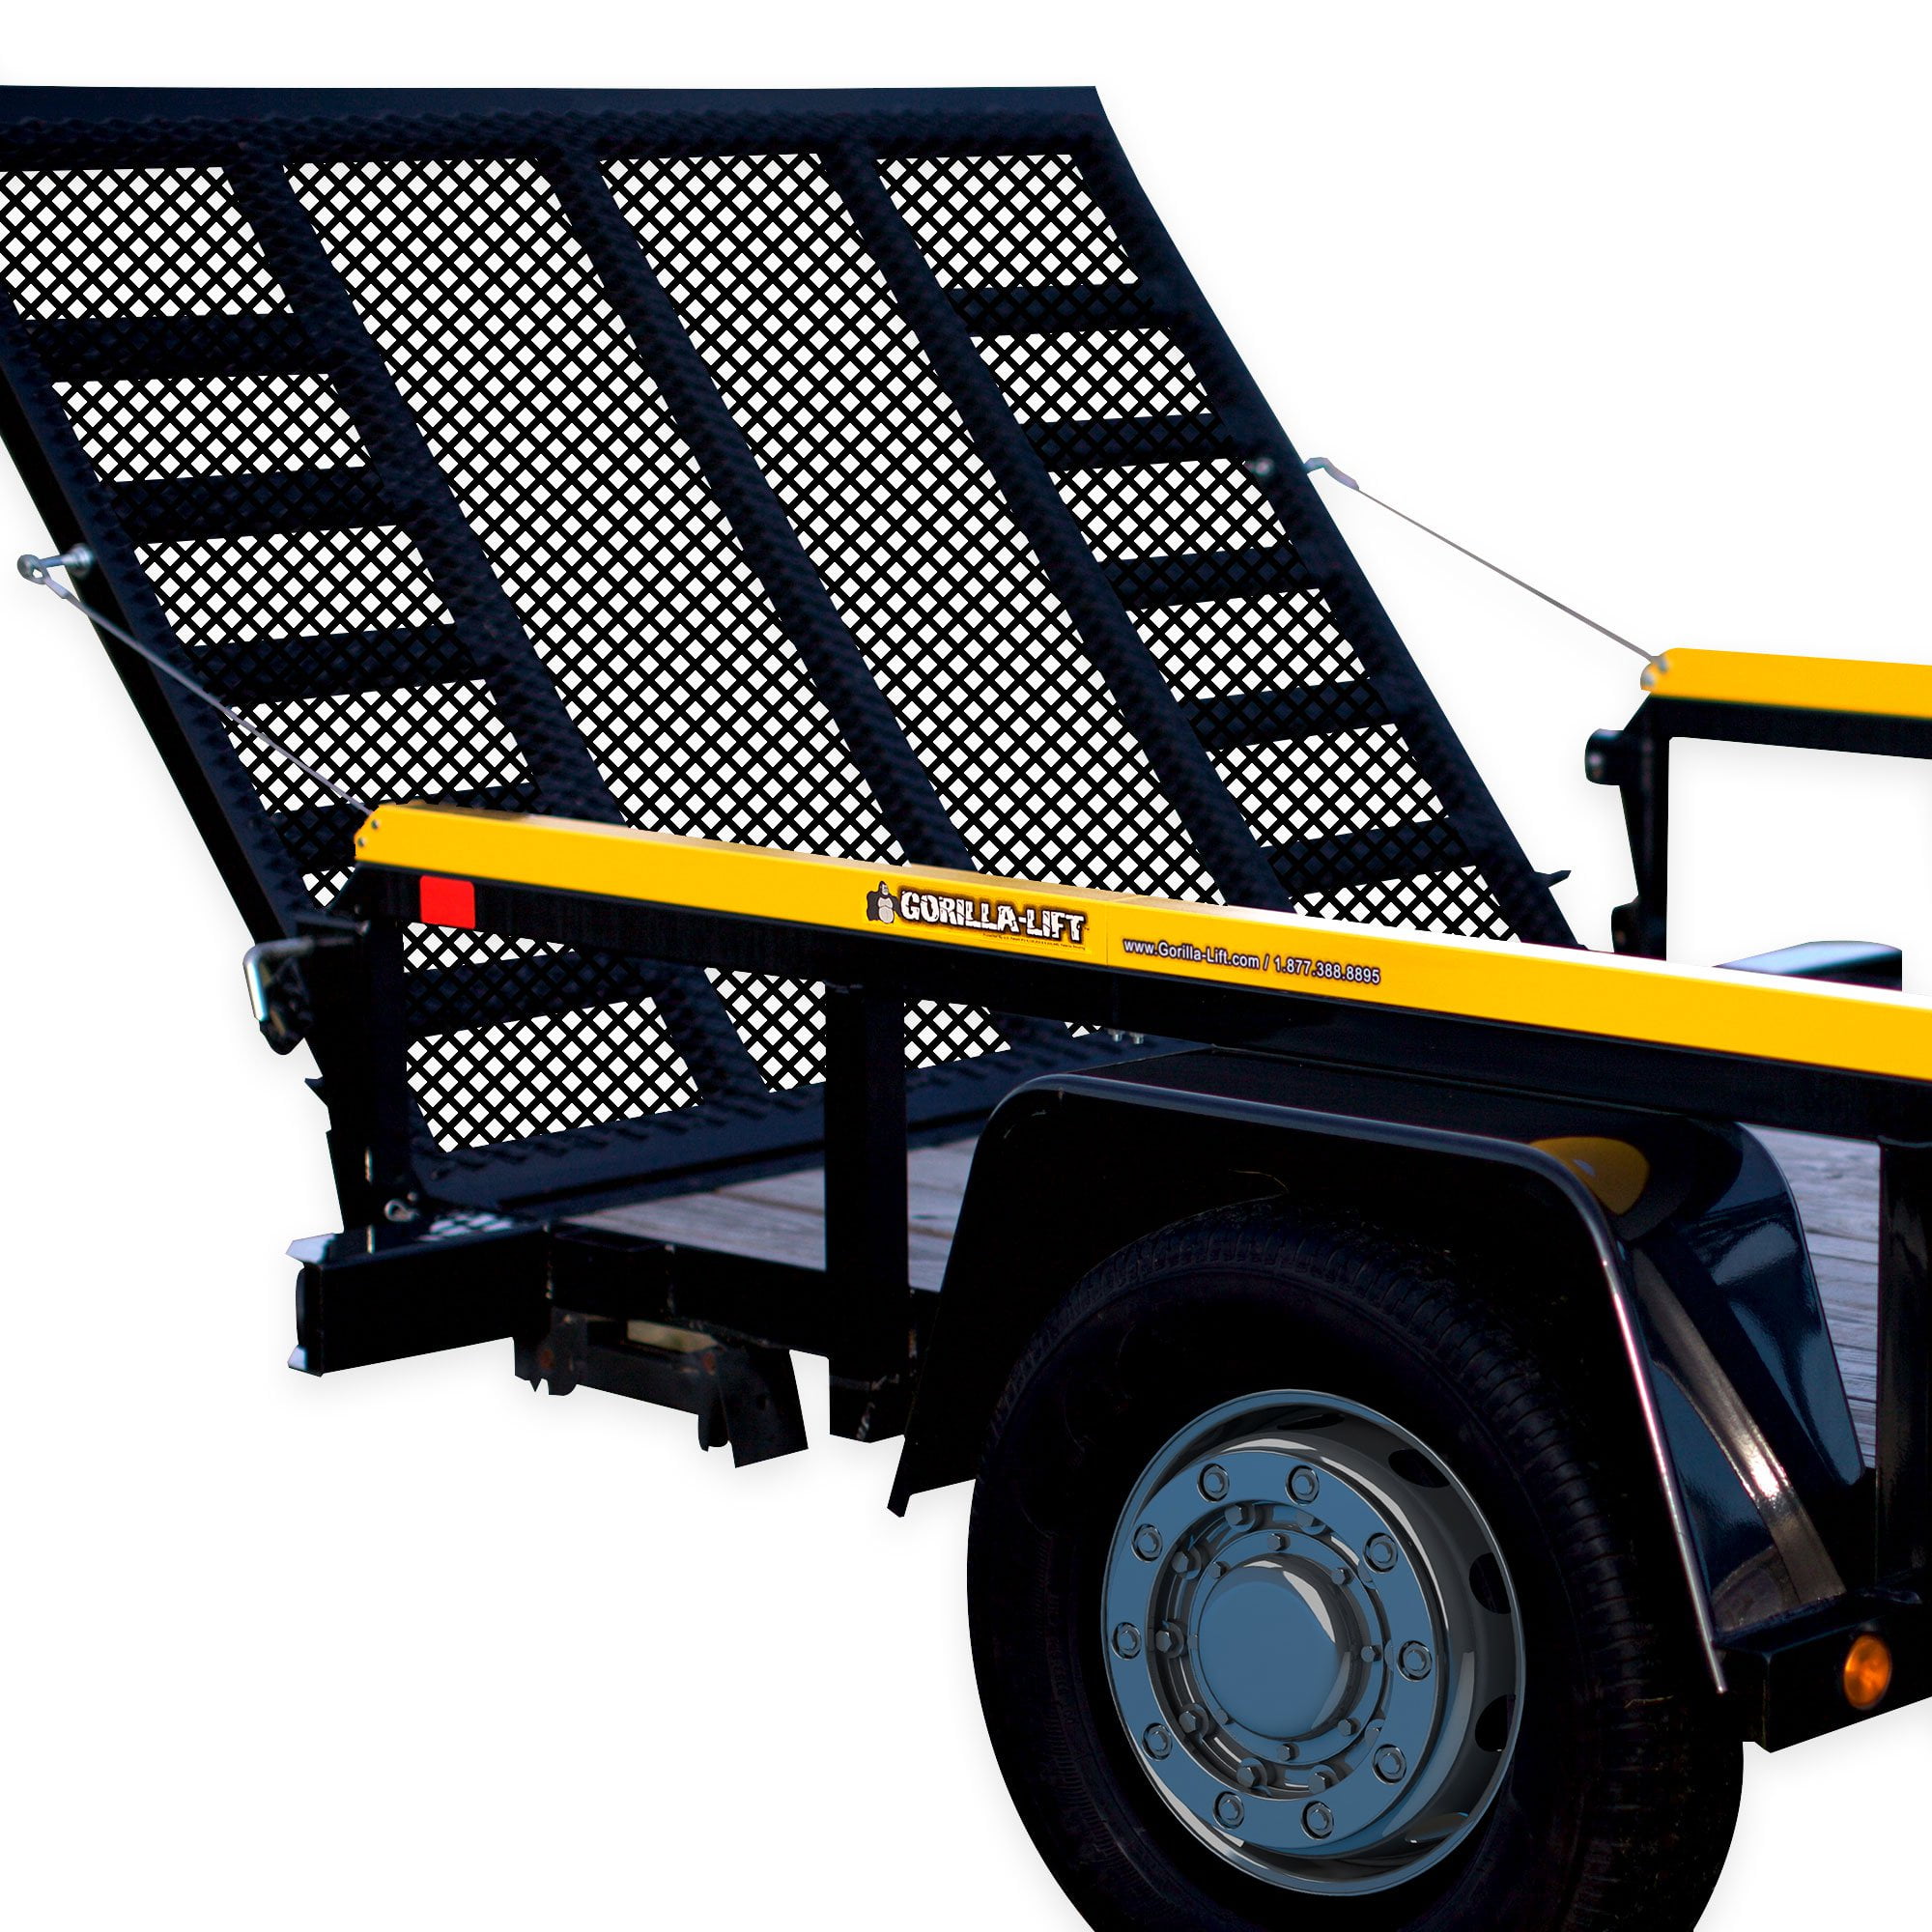 Gorilla Lift 2 Sided Tailgate Utility Trailer Gate And Ramp Assist System Com